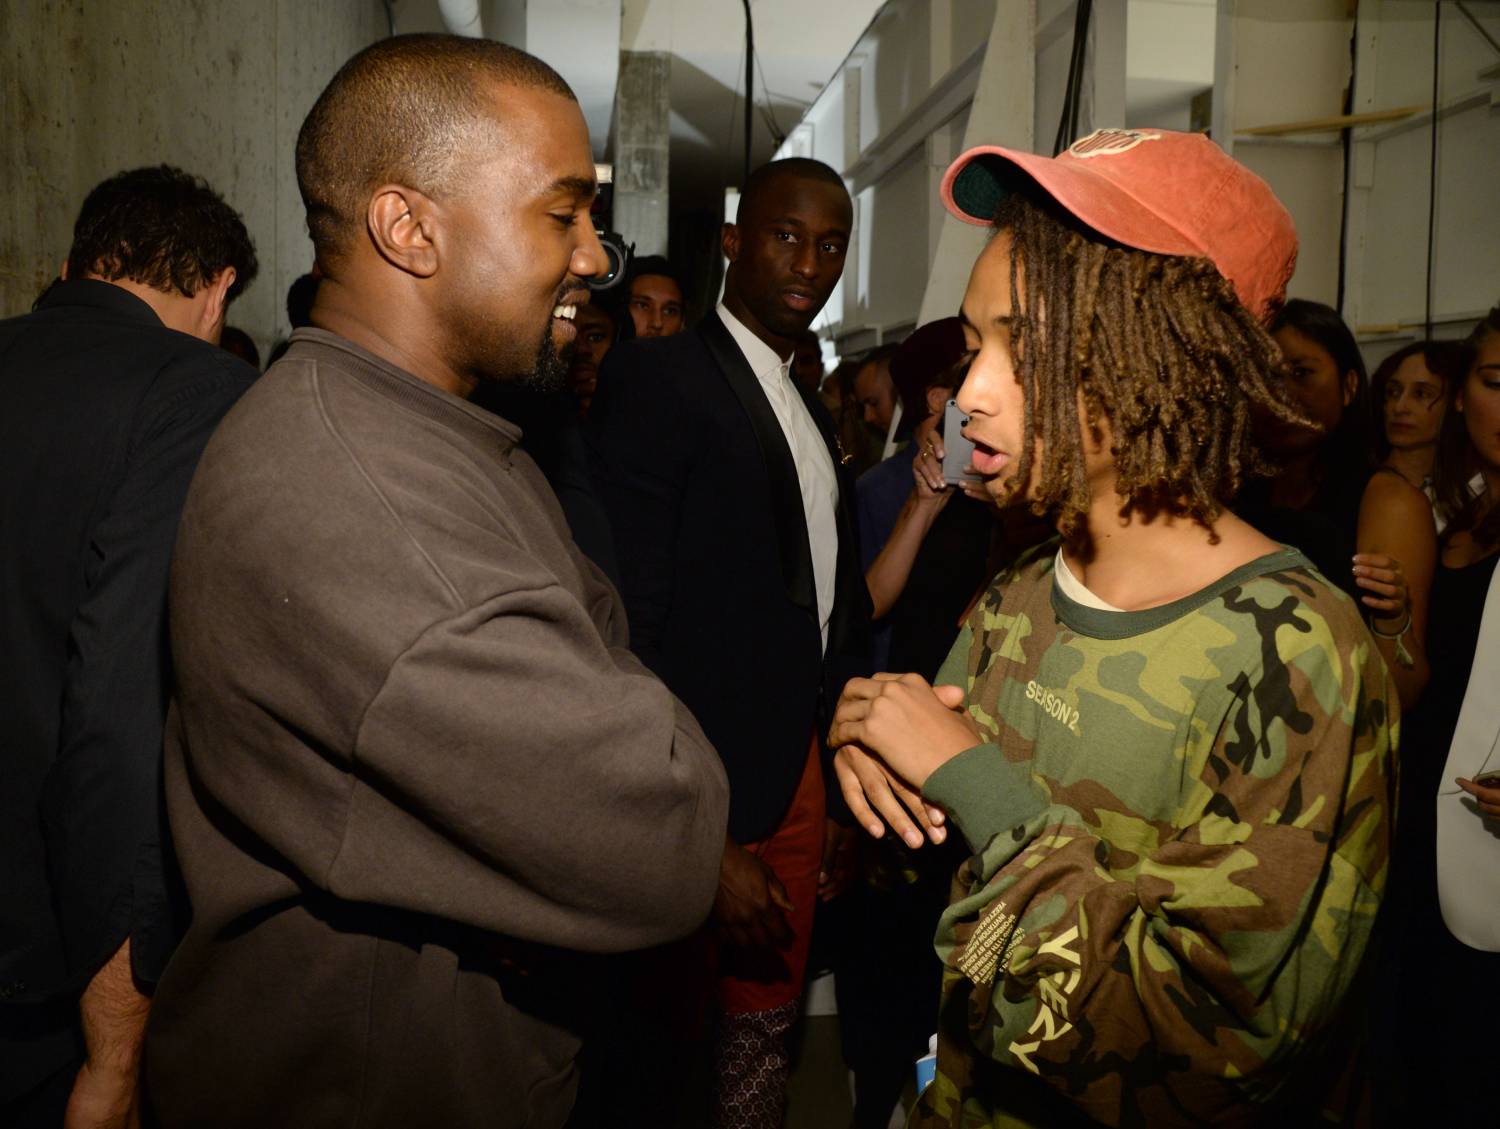 Kanye West and Jaden Smith attend Kanye West Yeezy Season 2 during New York Fashion Week at Skylight Modern on September 16, 2015 in New York City.